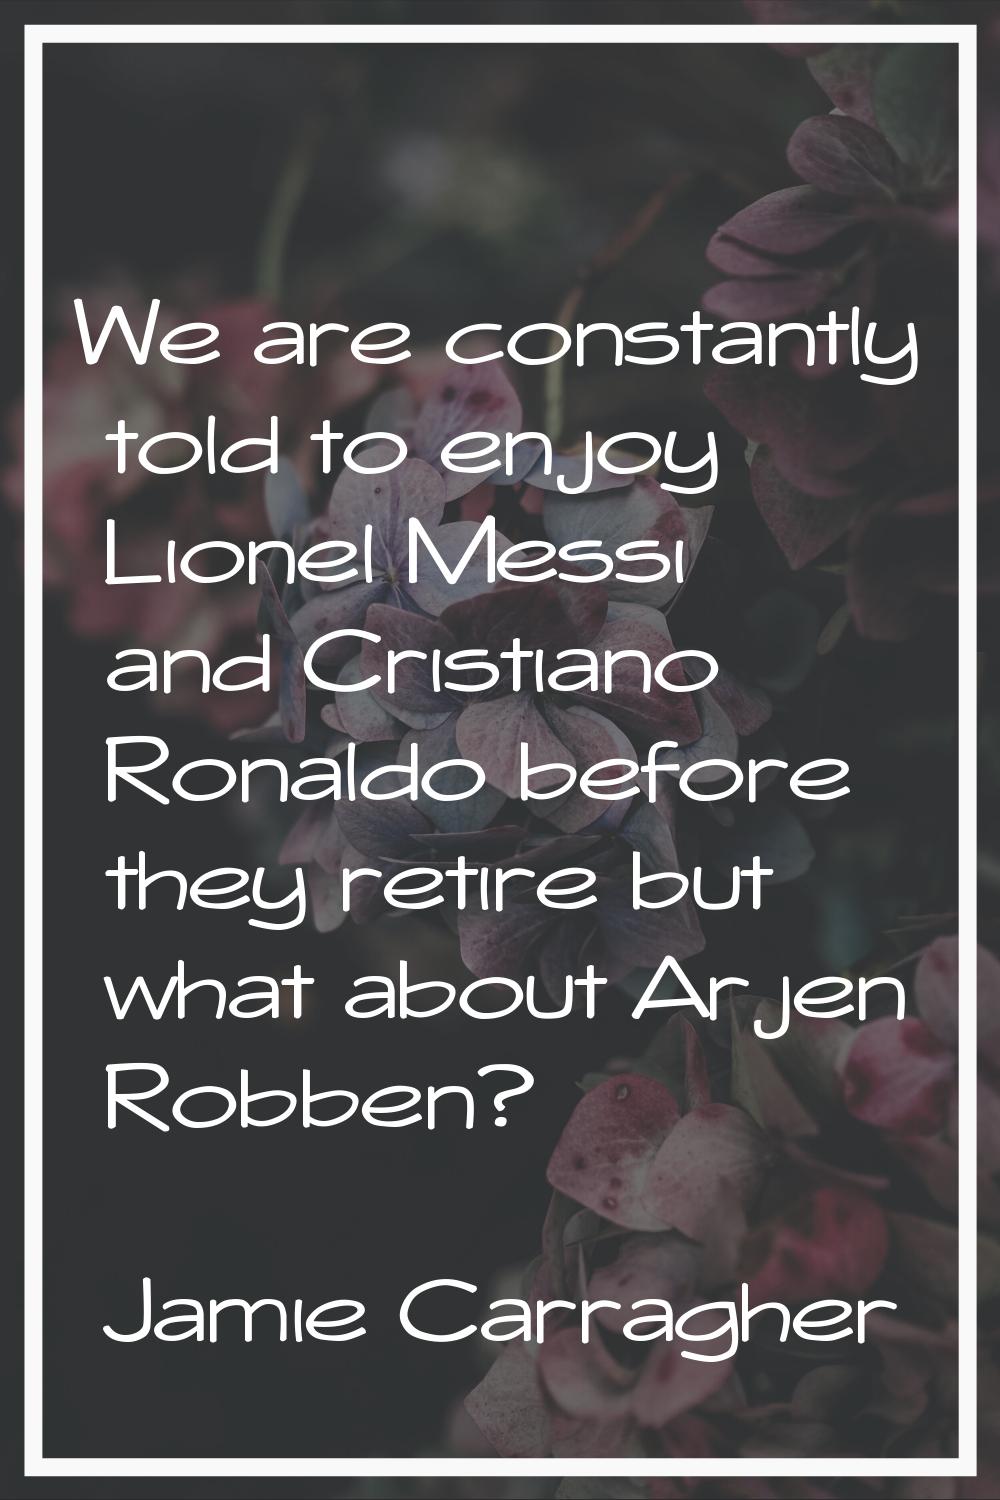 We are constantly told to enjoy Lionel Messi and Cristiano Ronaldo before they retire but what abou